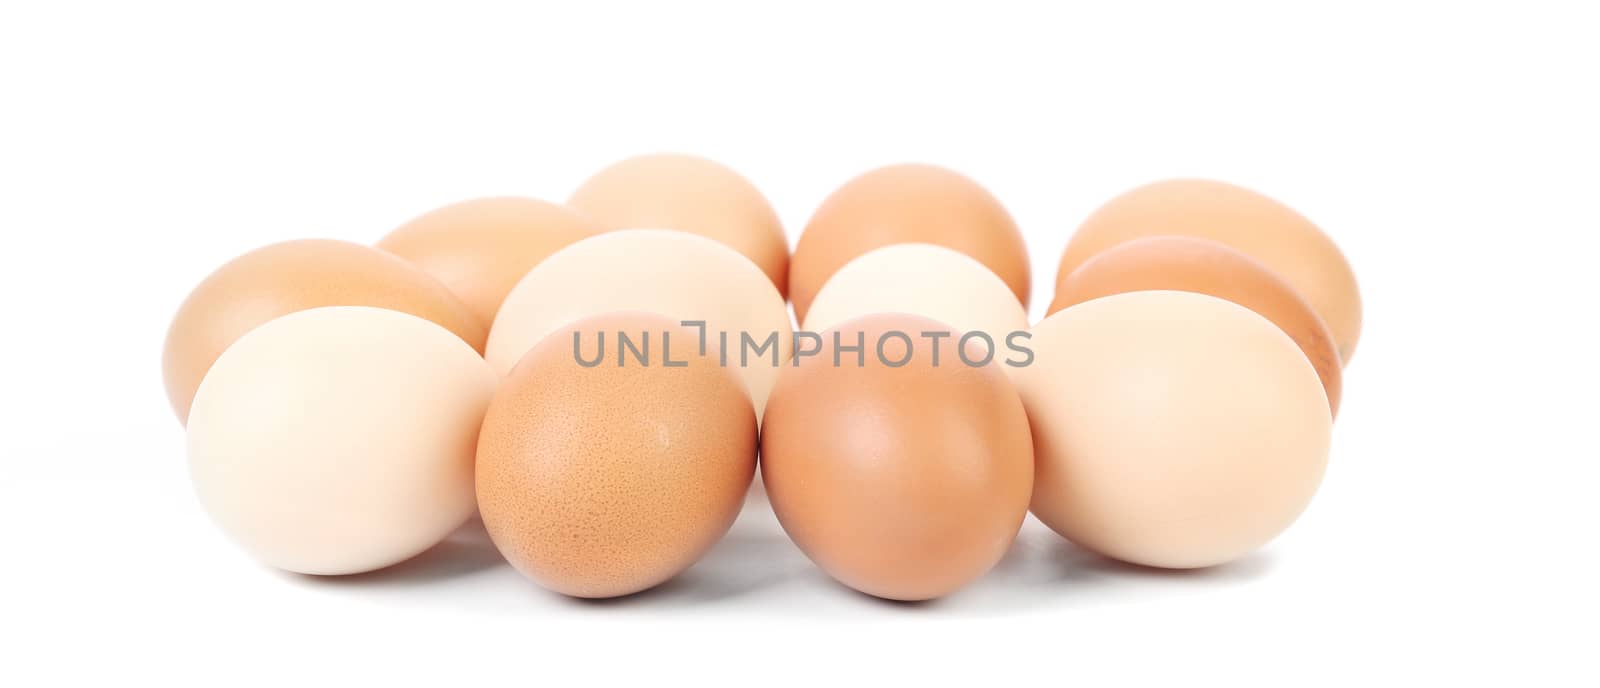 Brown and white eggs. Isolated on a white background.